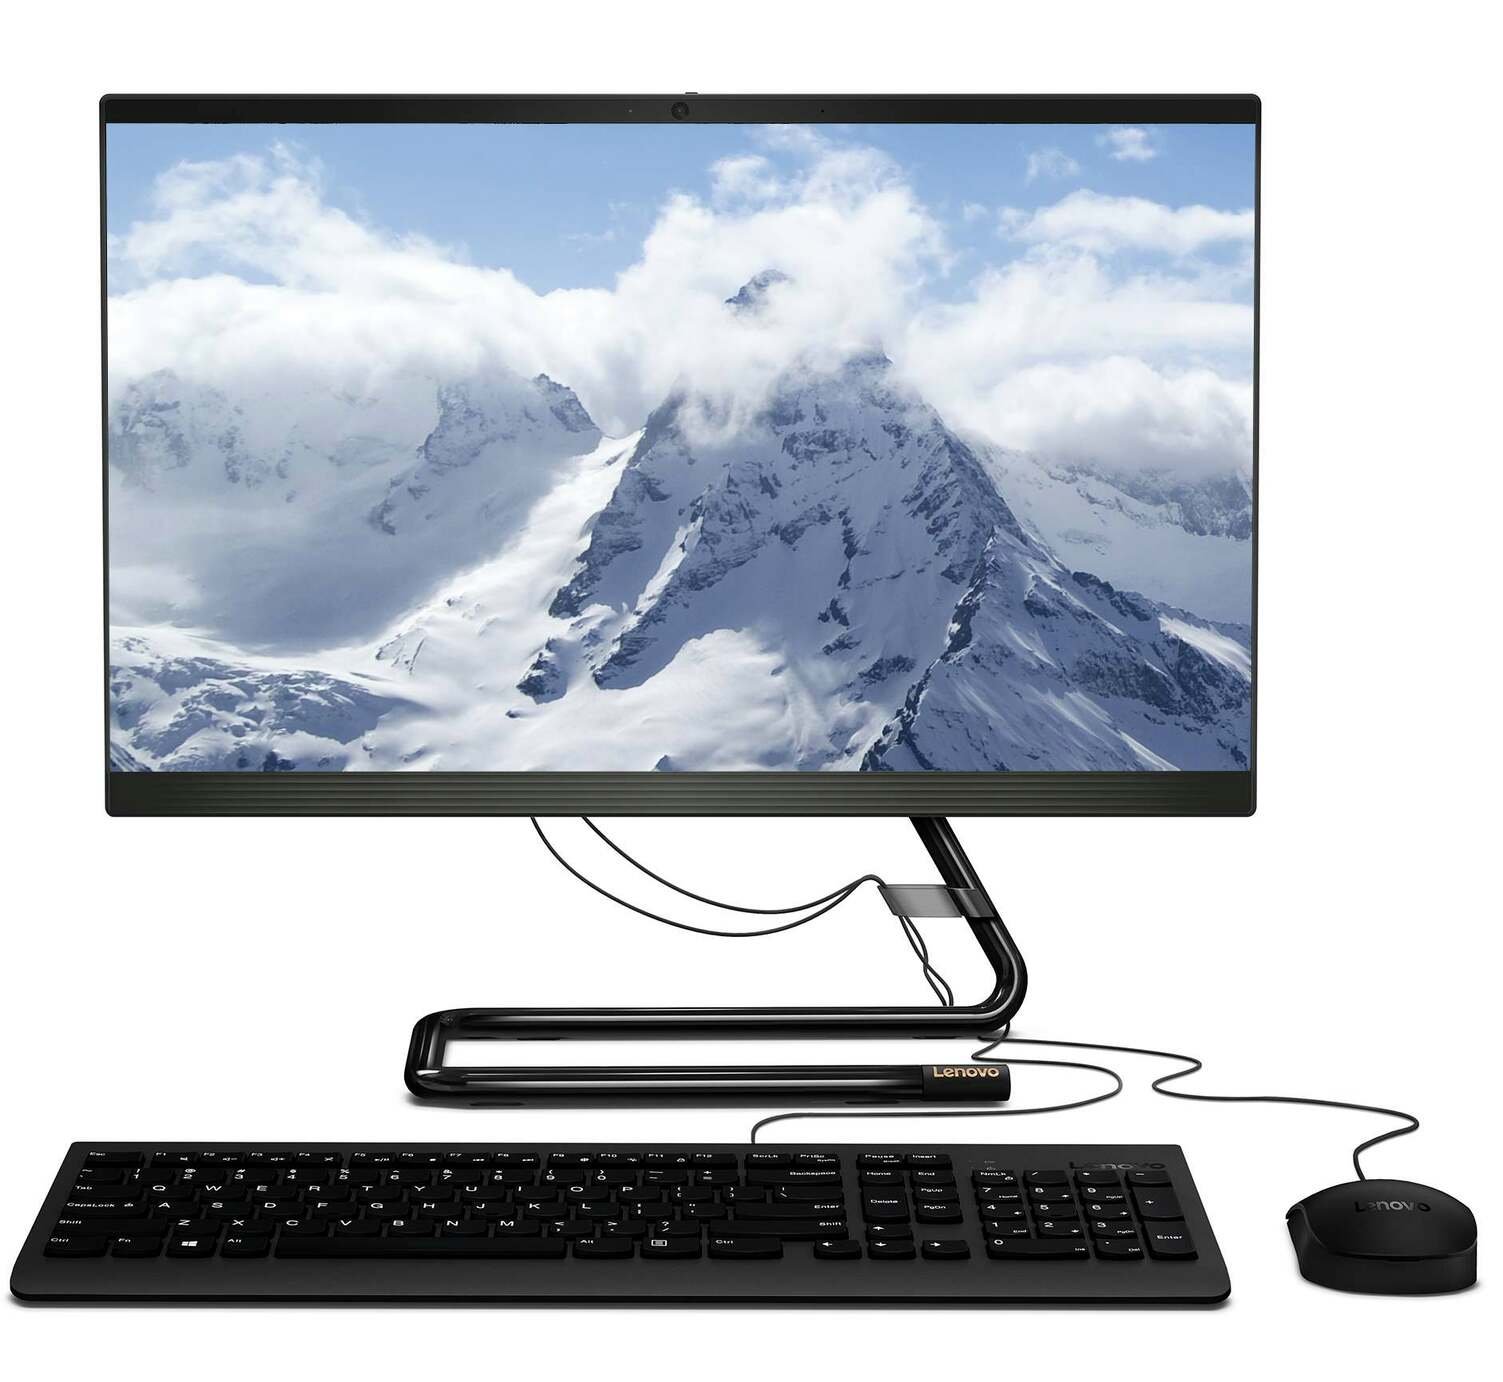 Lenovo IdeaCentre A340 22 Inch i3 4GB 1TB FHD All-in-One PC Review